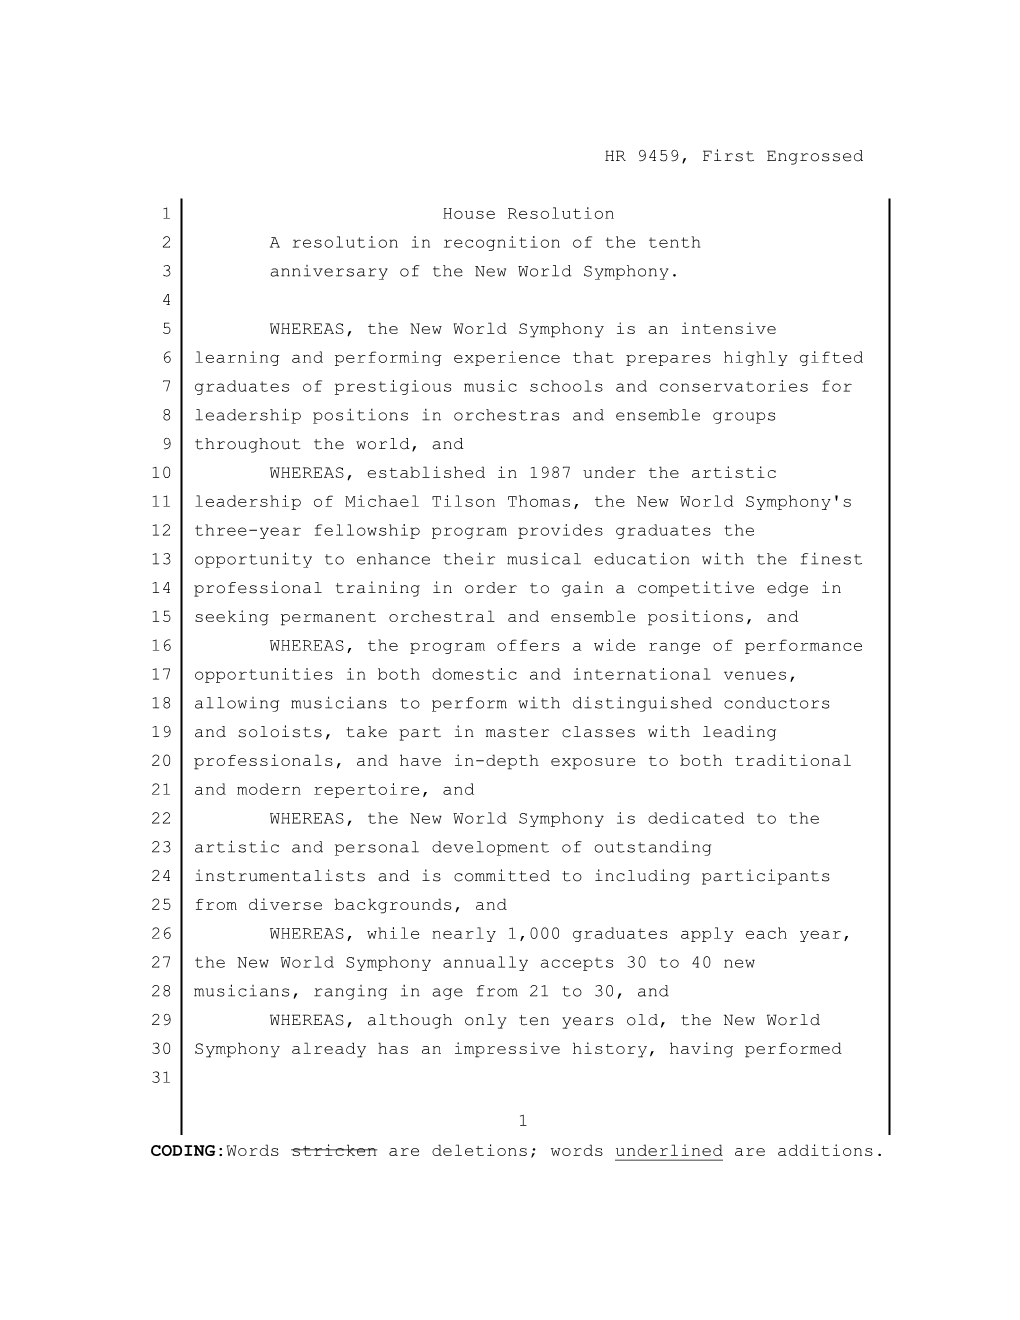 HR 9459, First Engrossed 1 House Resolution 2 a Resolution In